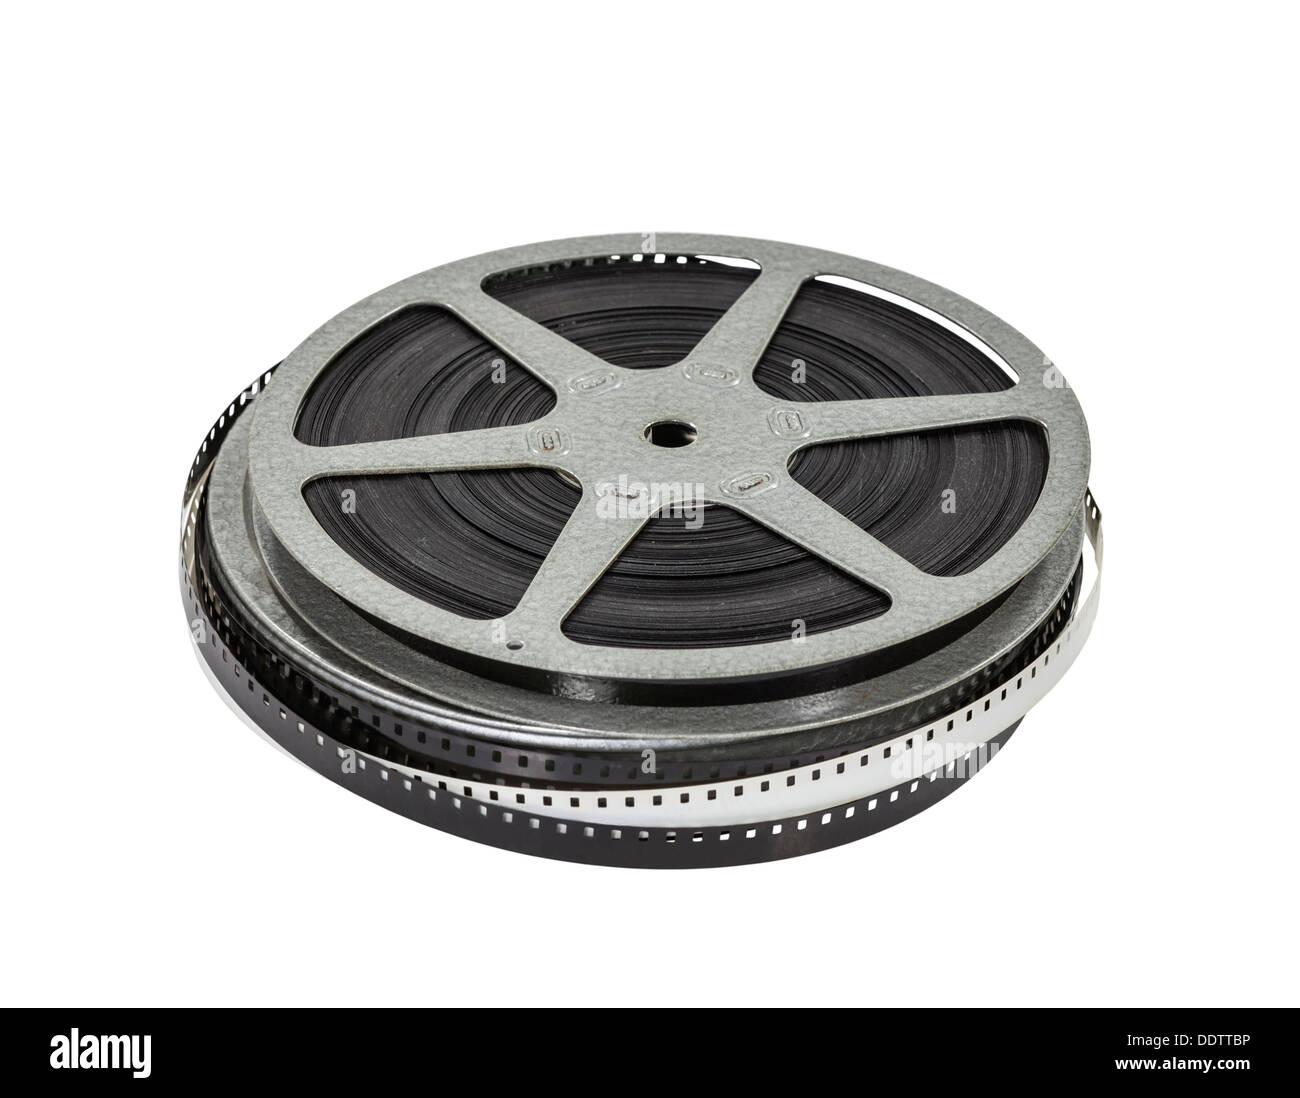 Vintage home movie film reel and can Stock Photo - Alamy